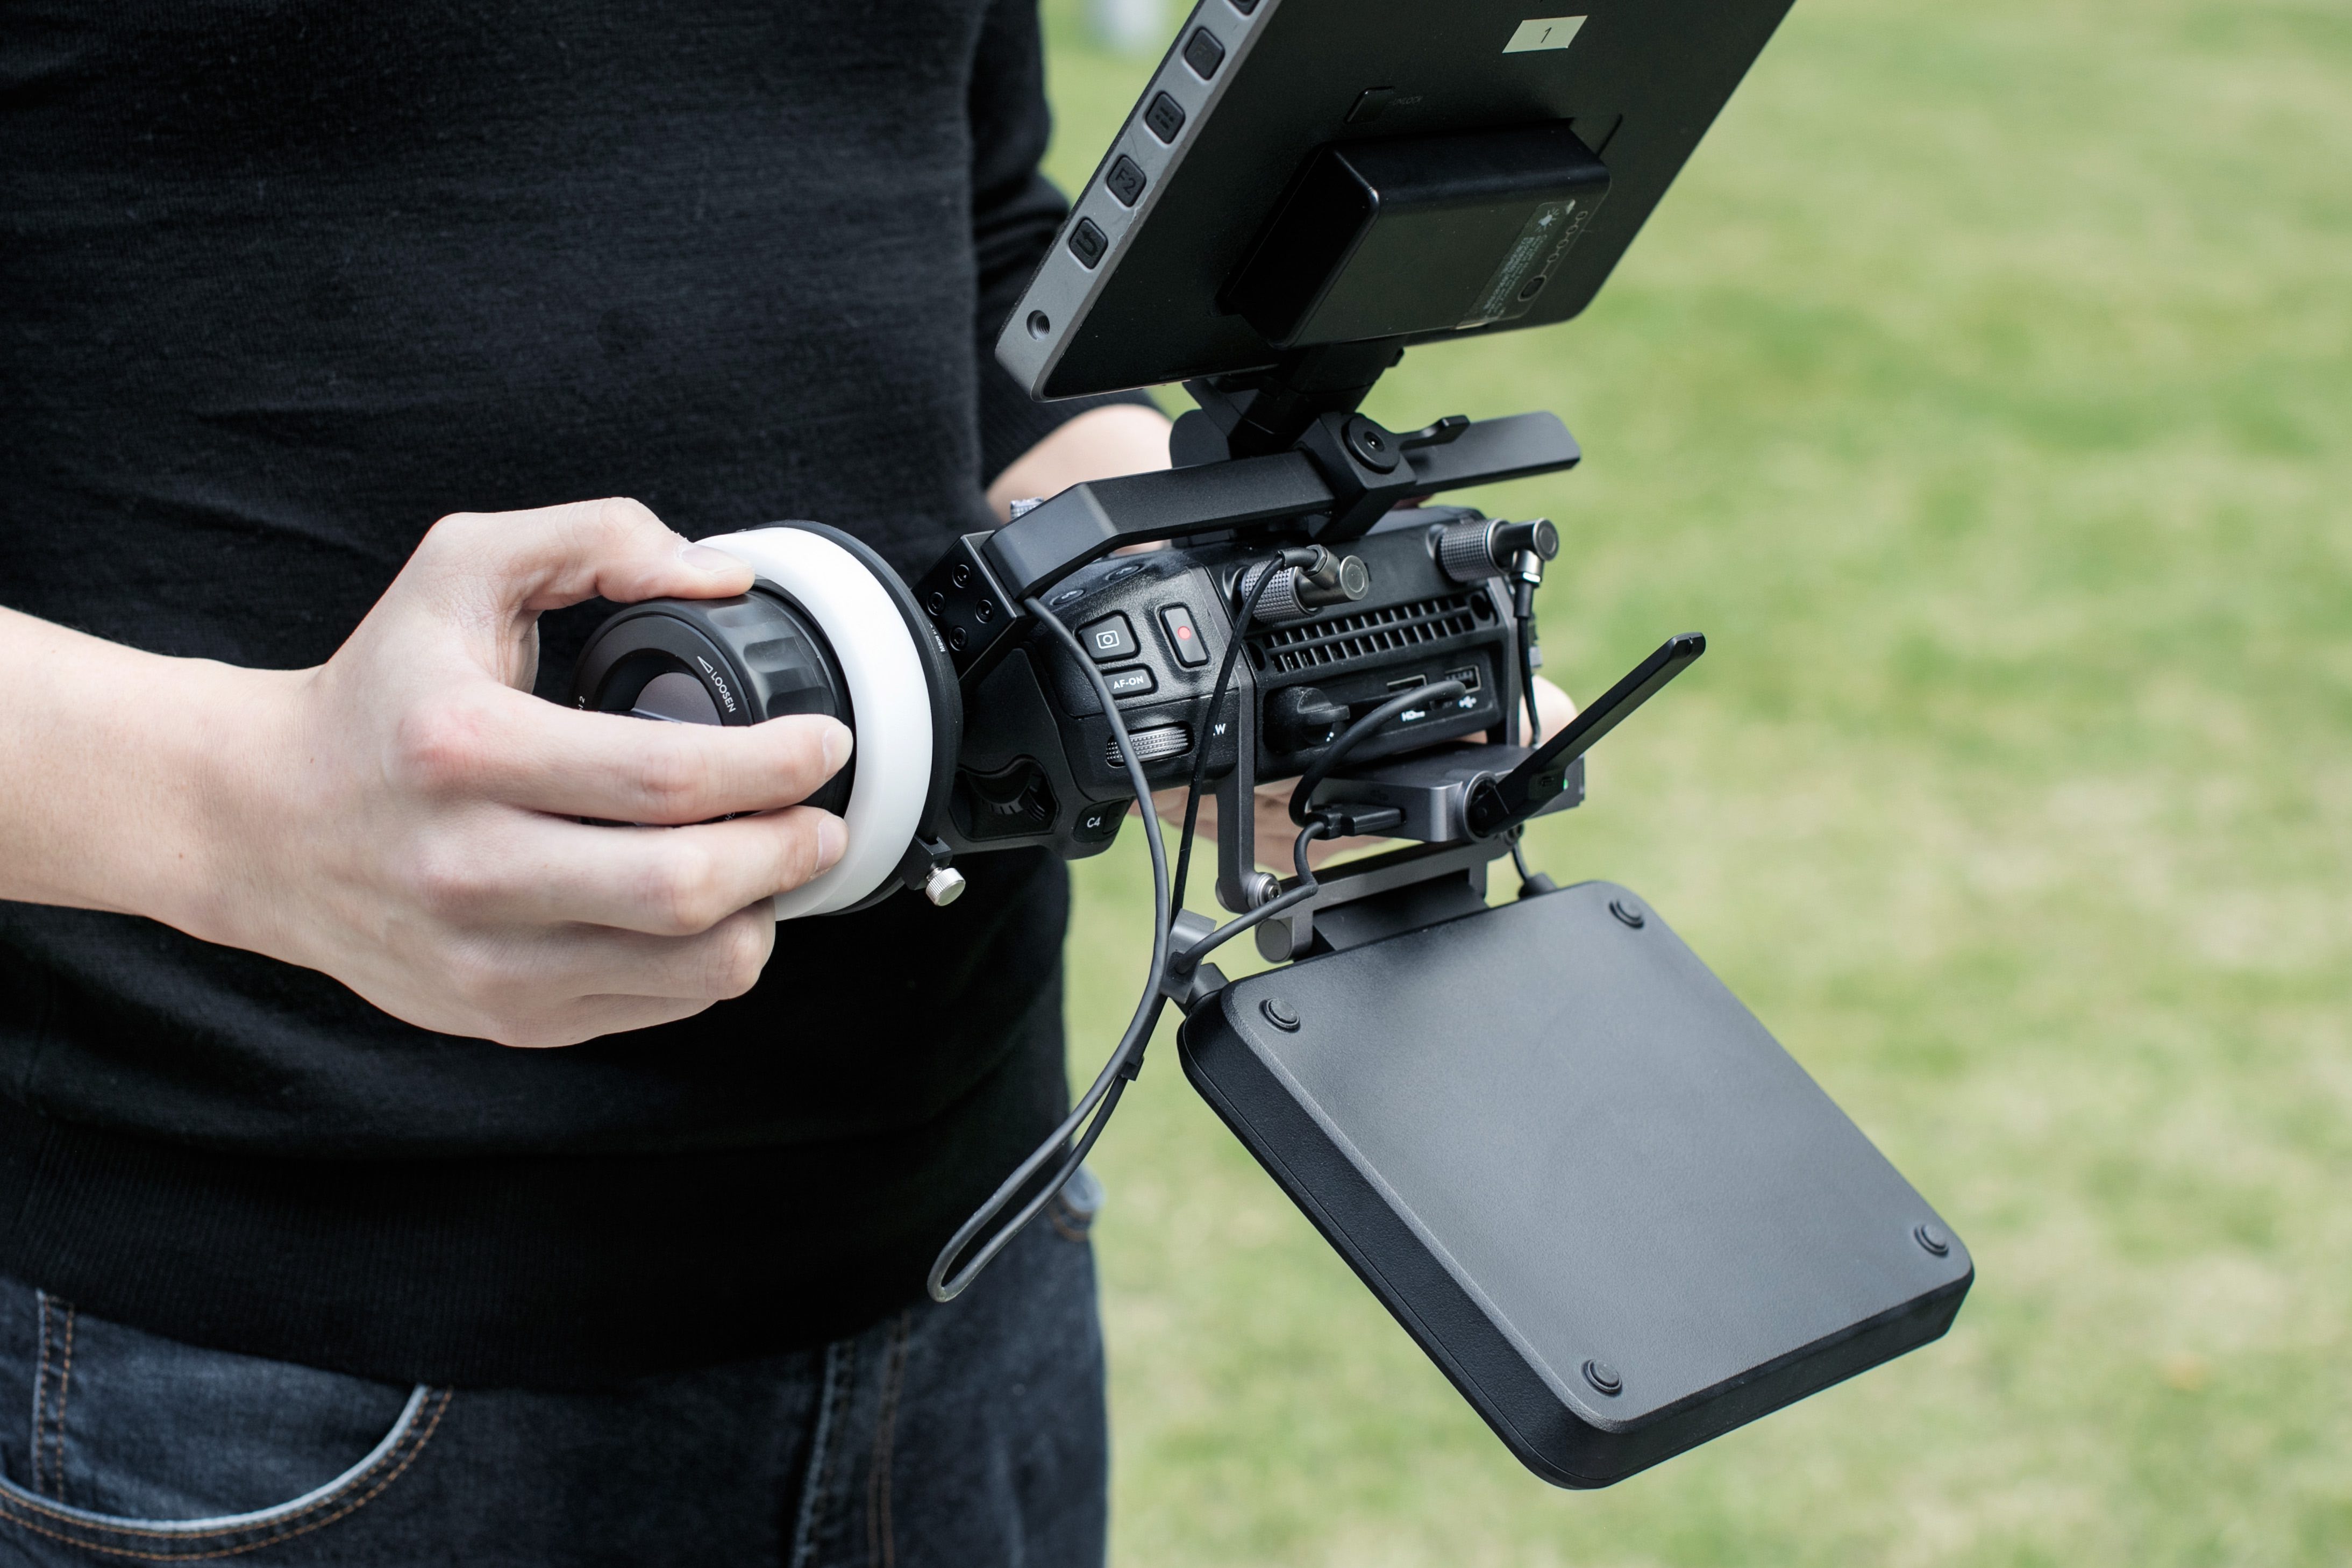 DJI Multilink connects the Inspire Remote With Up To 3 Controllers - Newsshooter